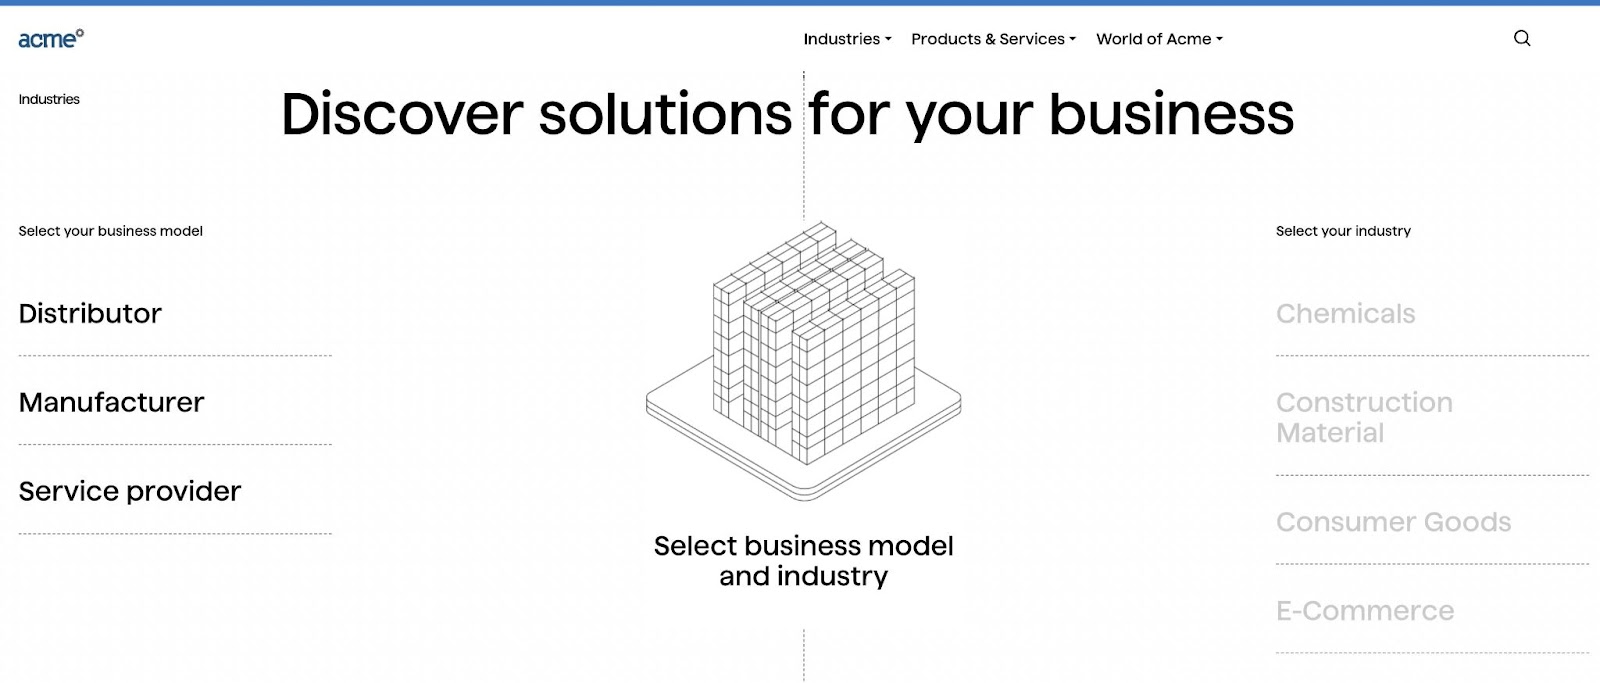 "Discover solutions for your business" page on ACME